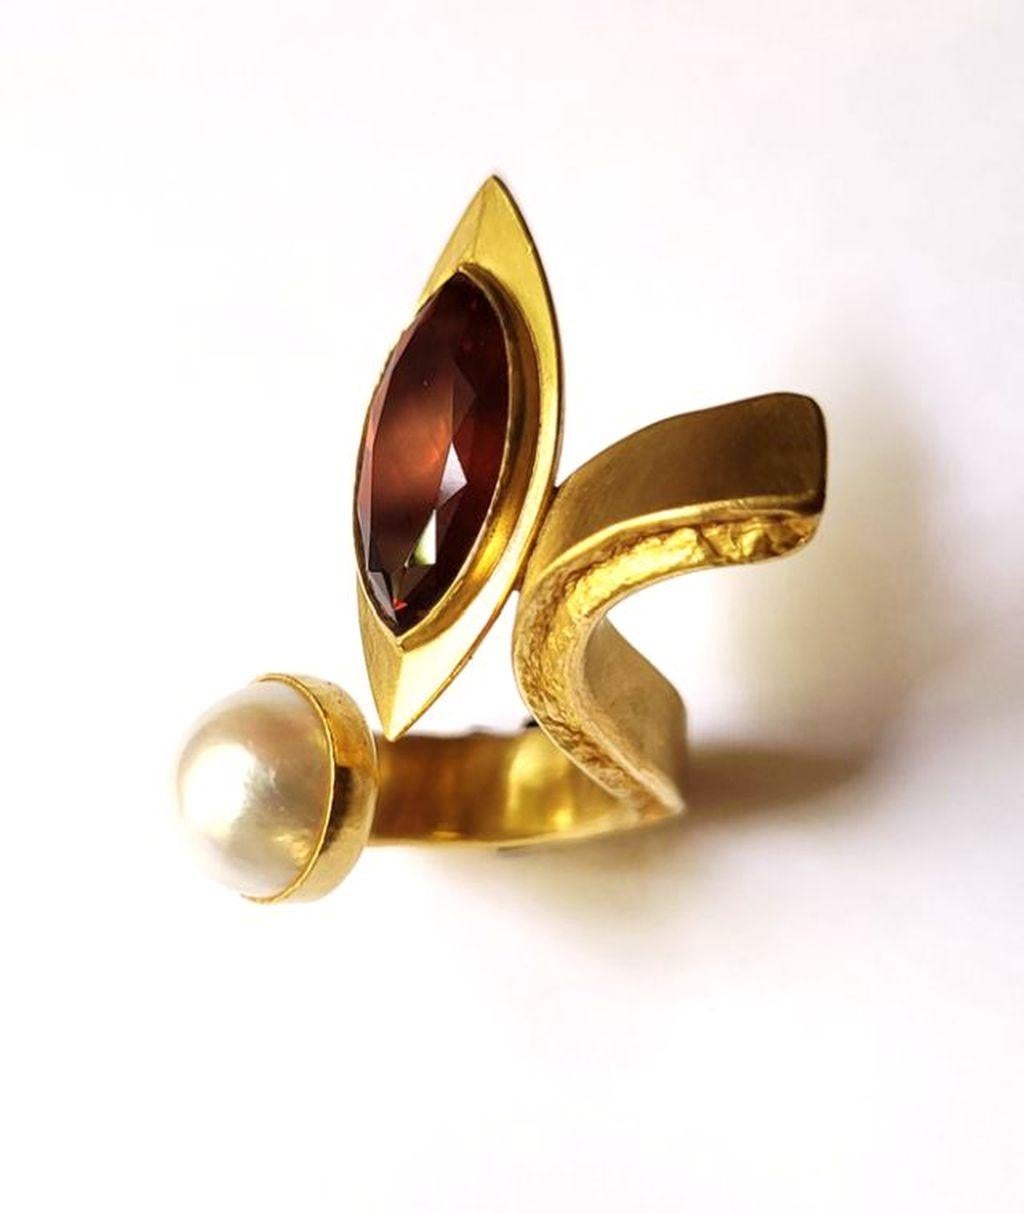 It is more a piece of art than regular jewelry.  Magnificent ring made of 24 carat gold by Marc Wilpert. The unique design makes this ring a statement piece. The sparkling navette cut Madeira citrine next to the shiny mabée pearl with very good